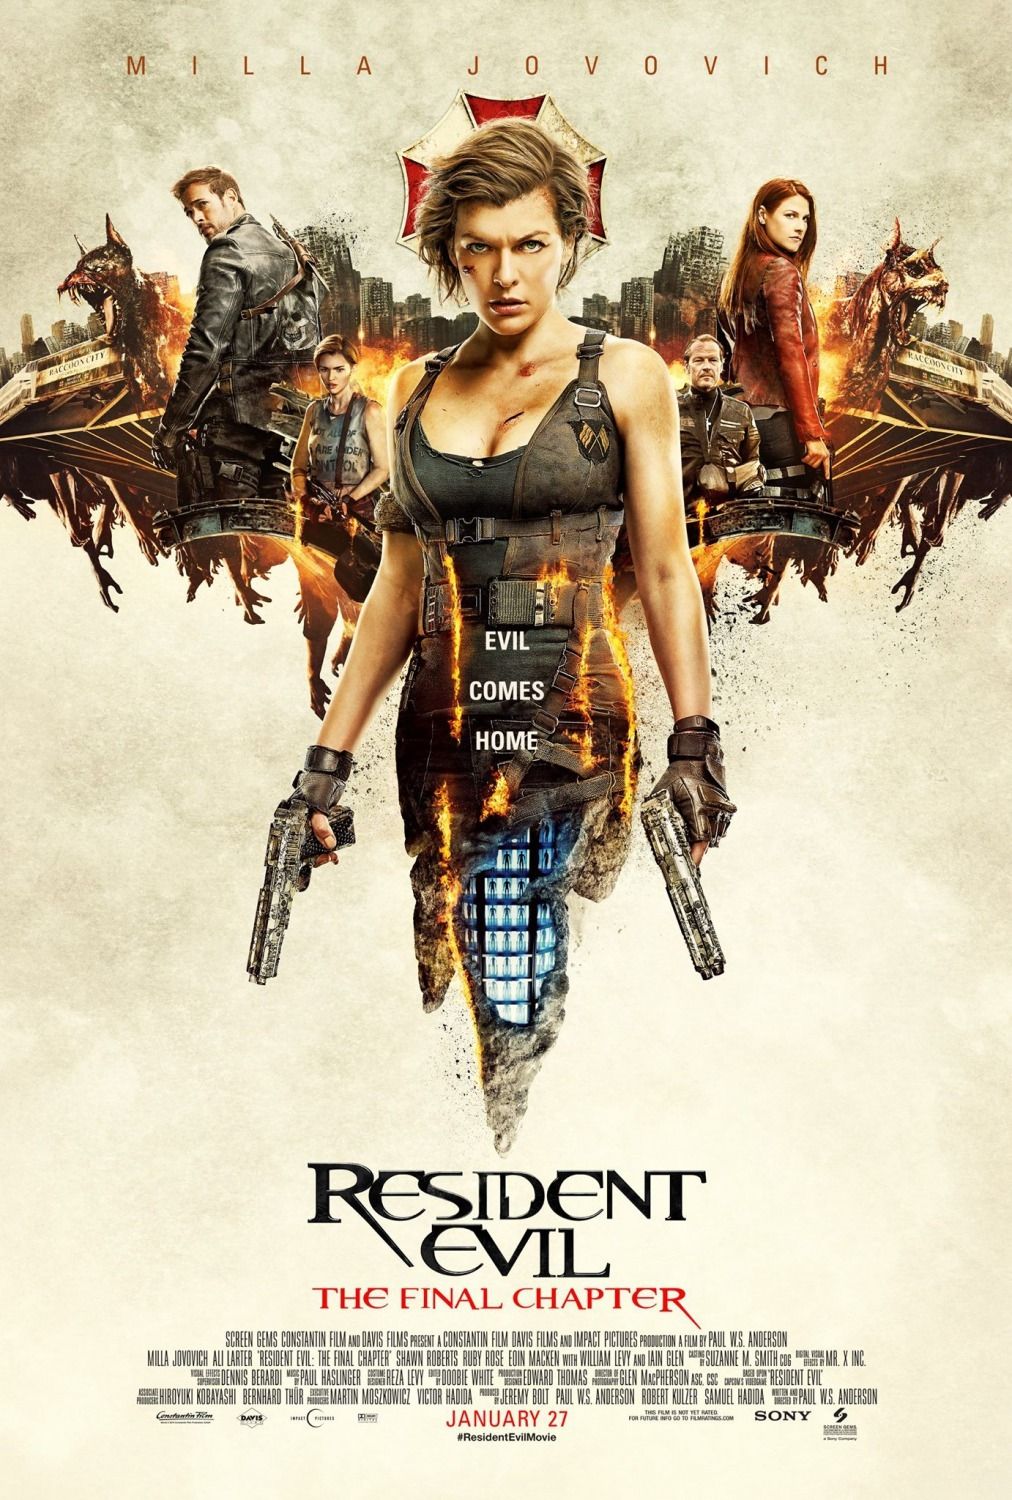 How to watch all 'Resident Evil' movies and shows in chronological